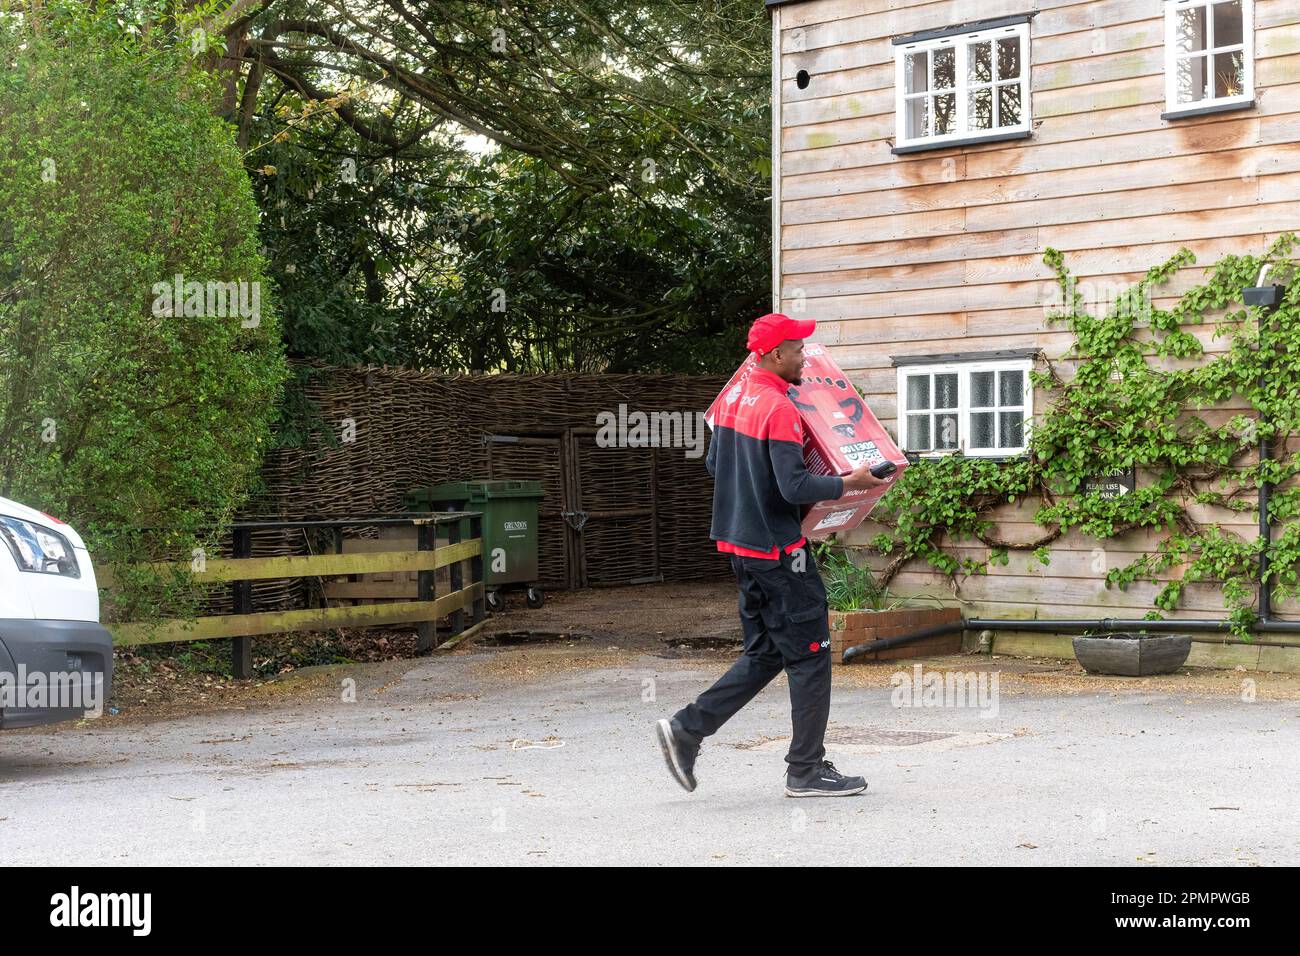 DPD courier driver delivering a large parcel to a property, England, UK Stock Photo